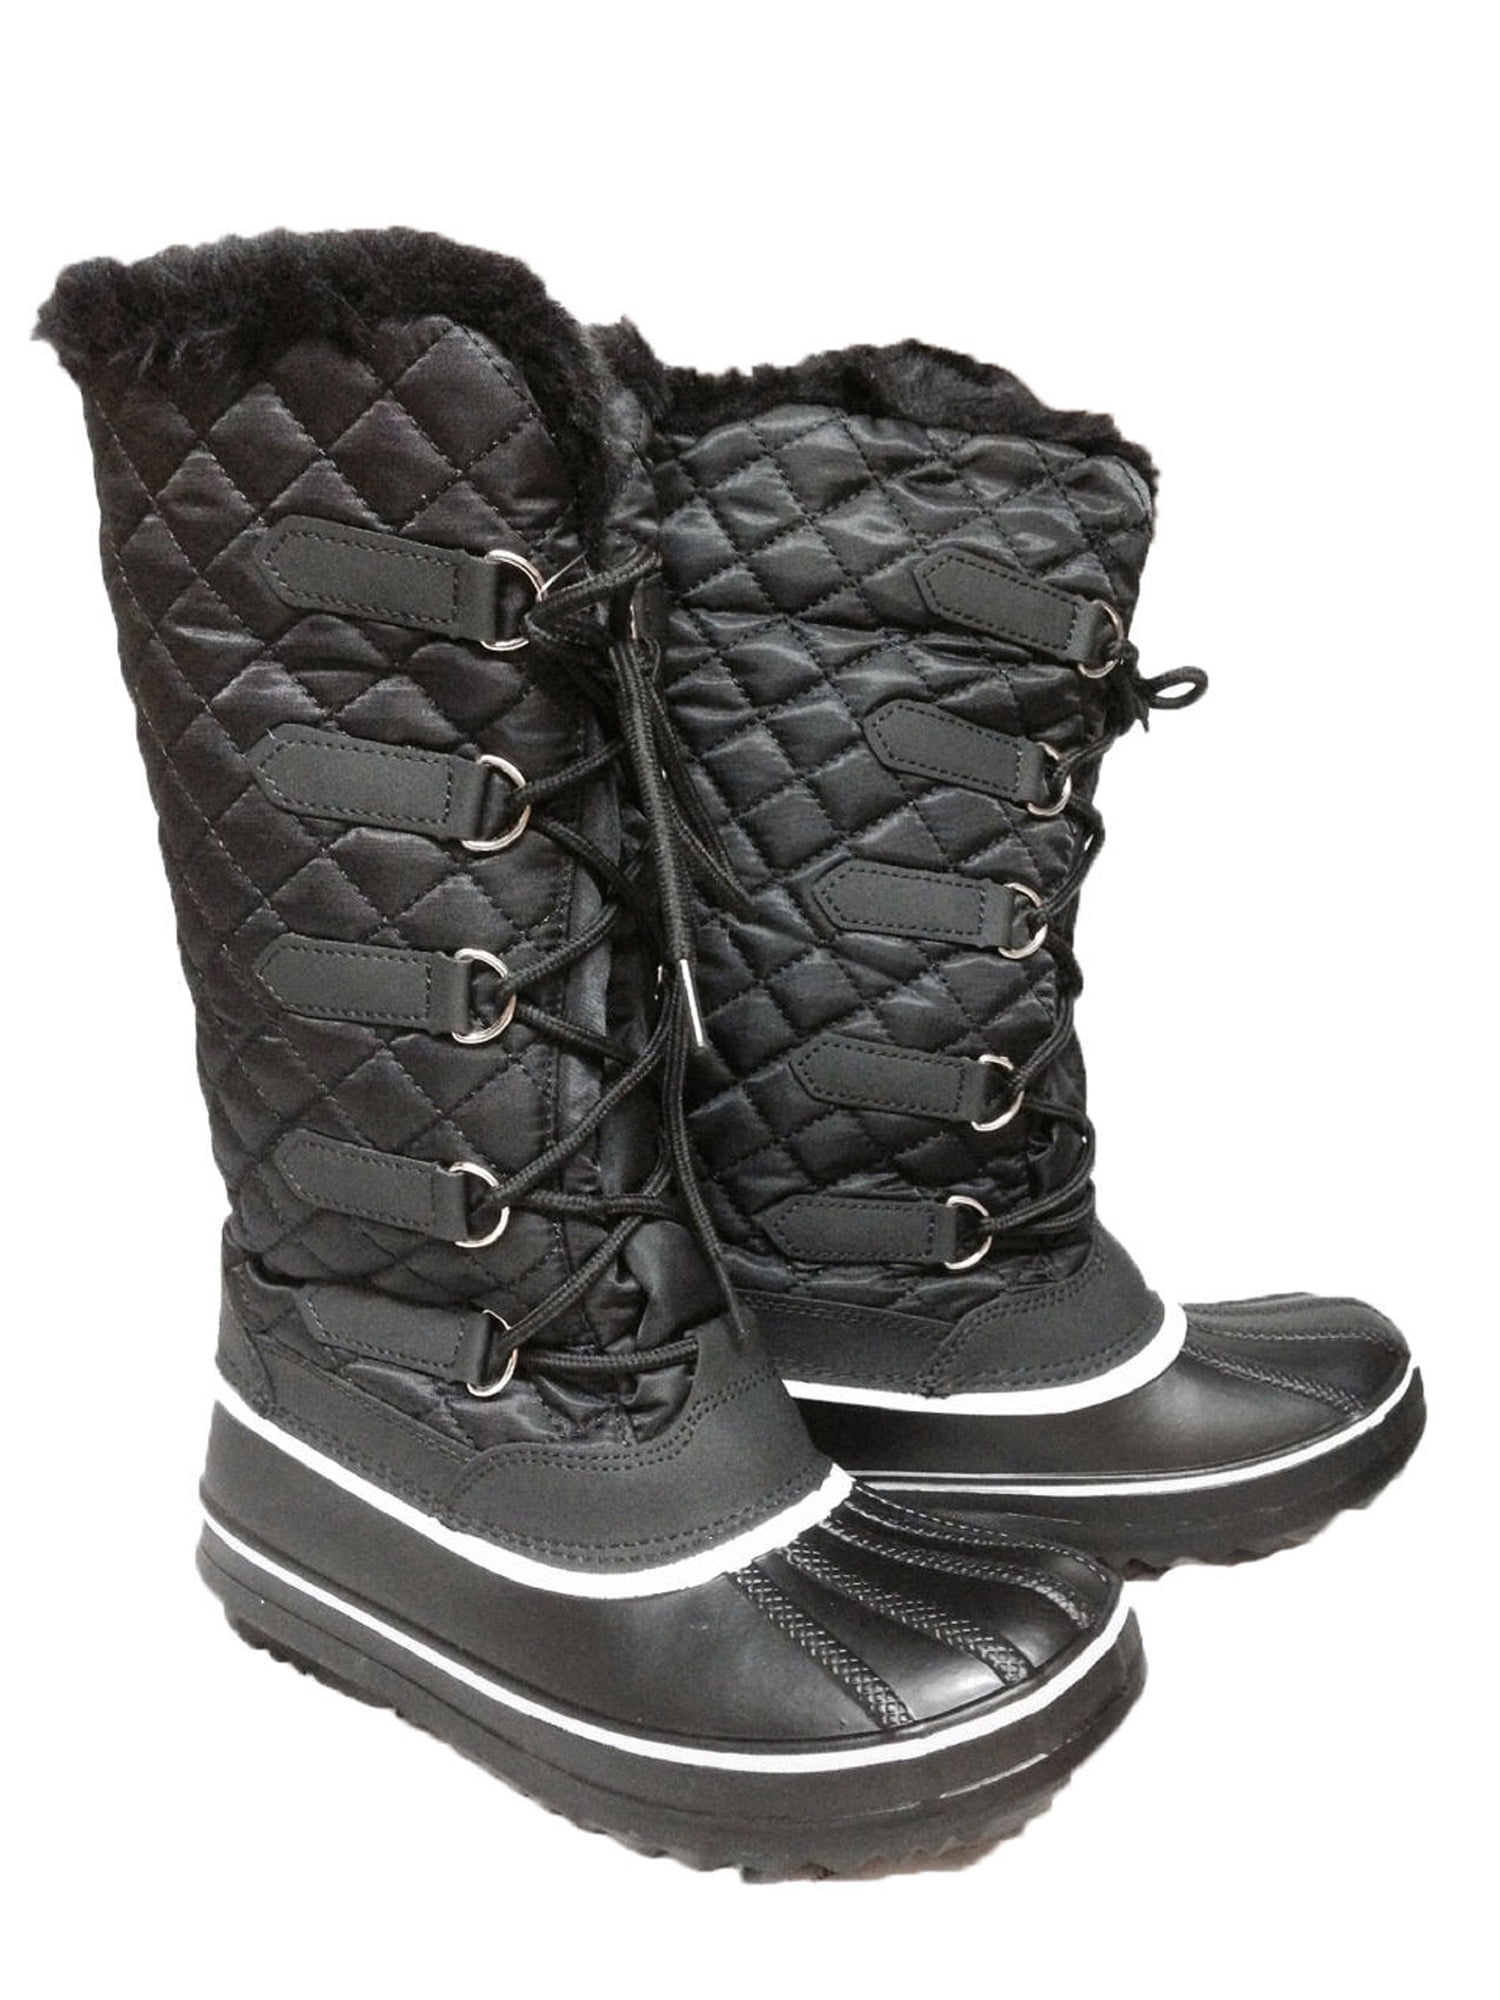 Blizzard Boots Ladies Faux Fur Lined Water Resistant Warm Pull On Boots Black 